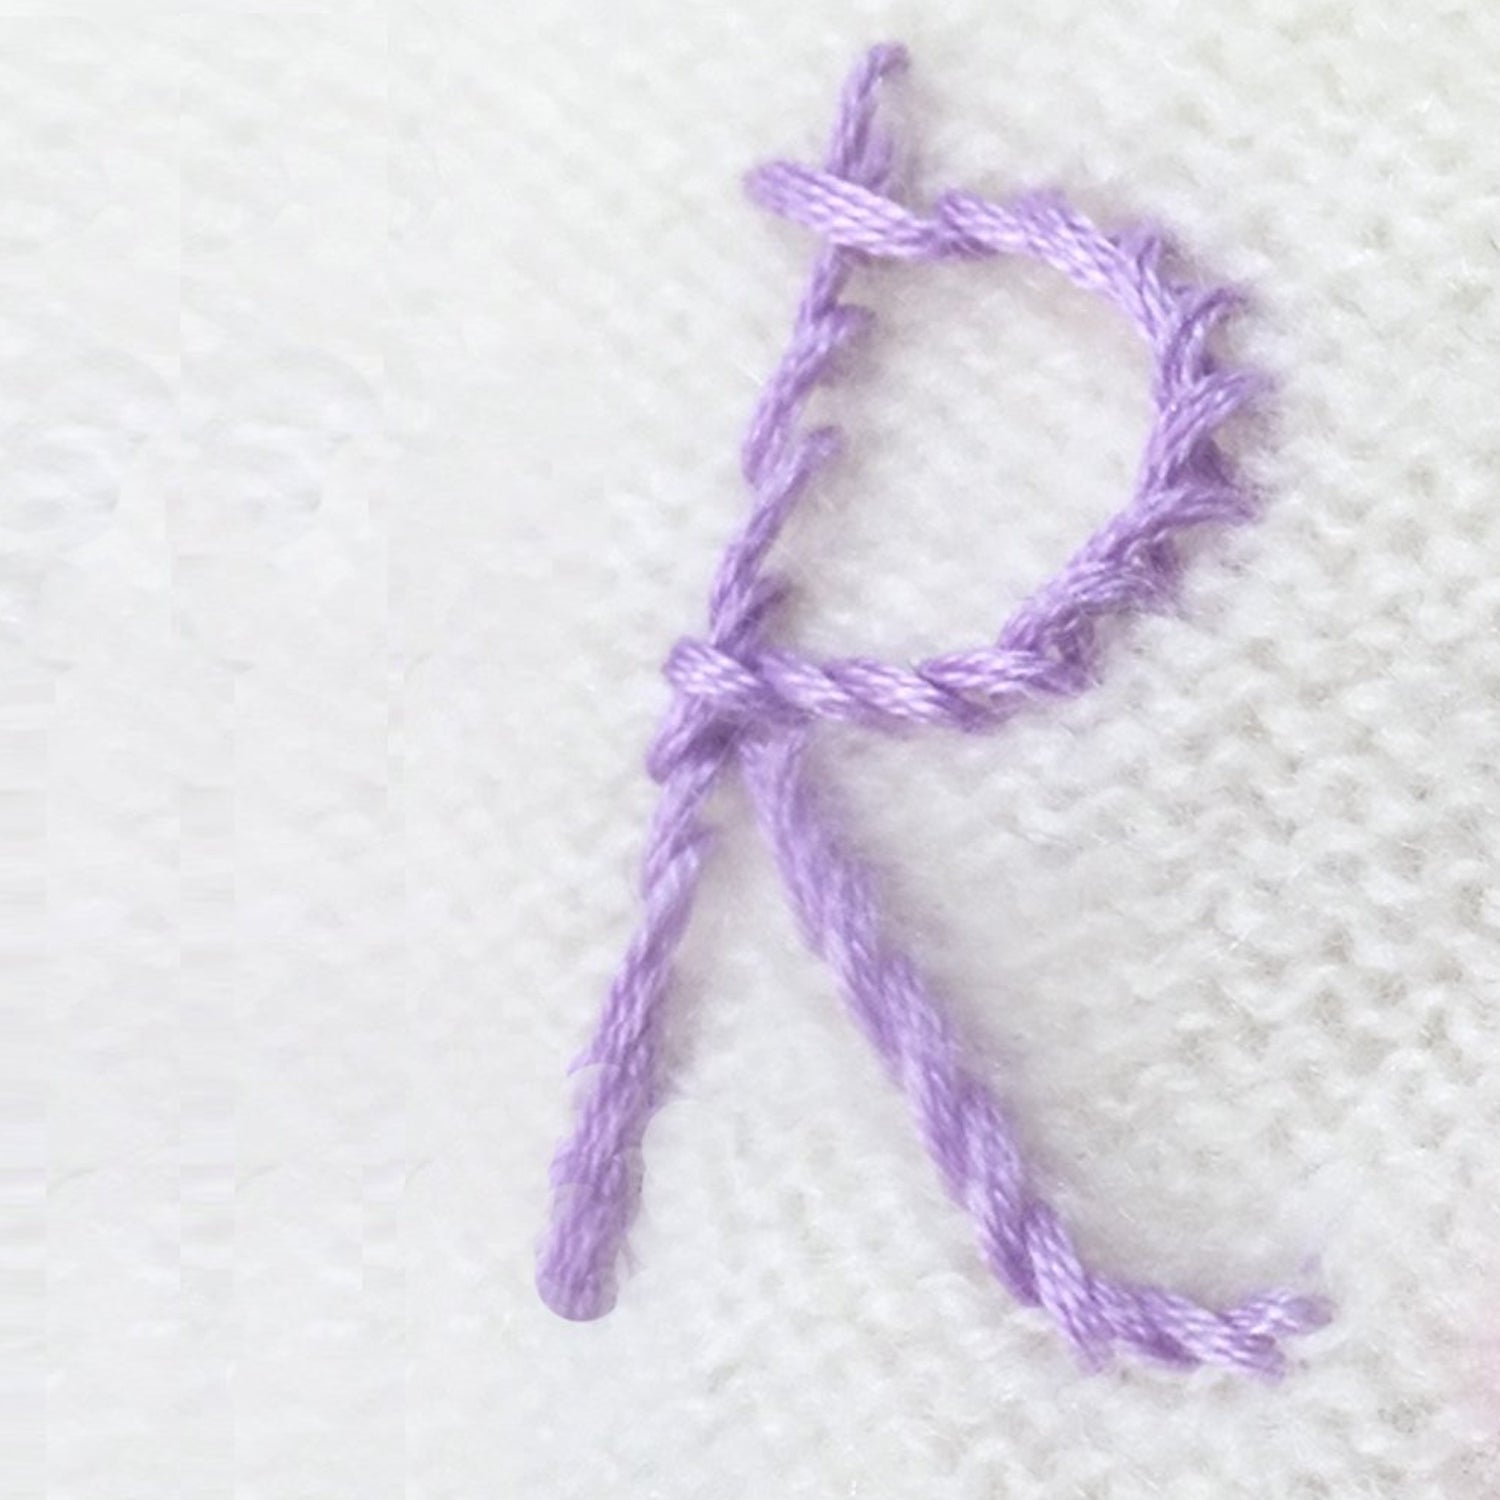 embroidered initial